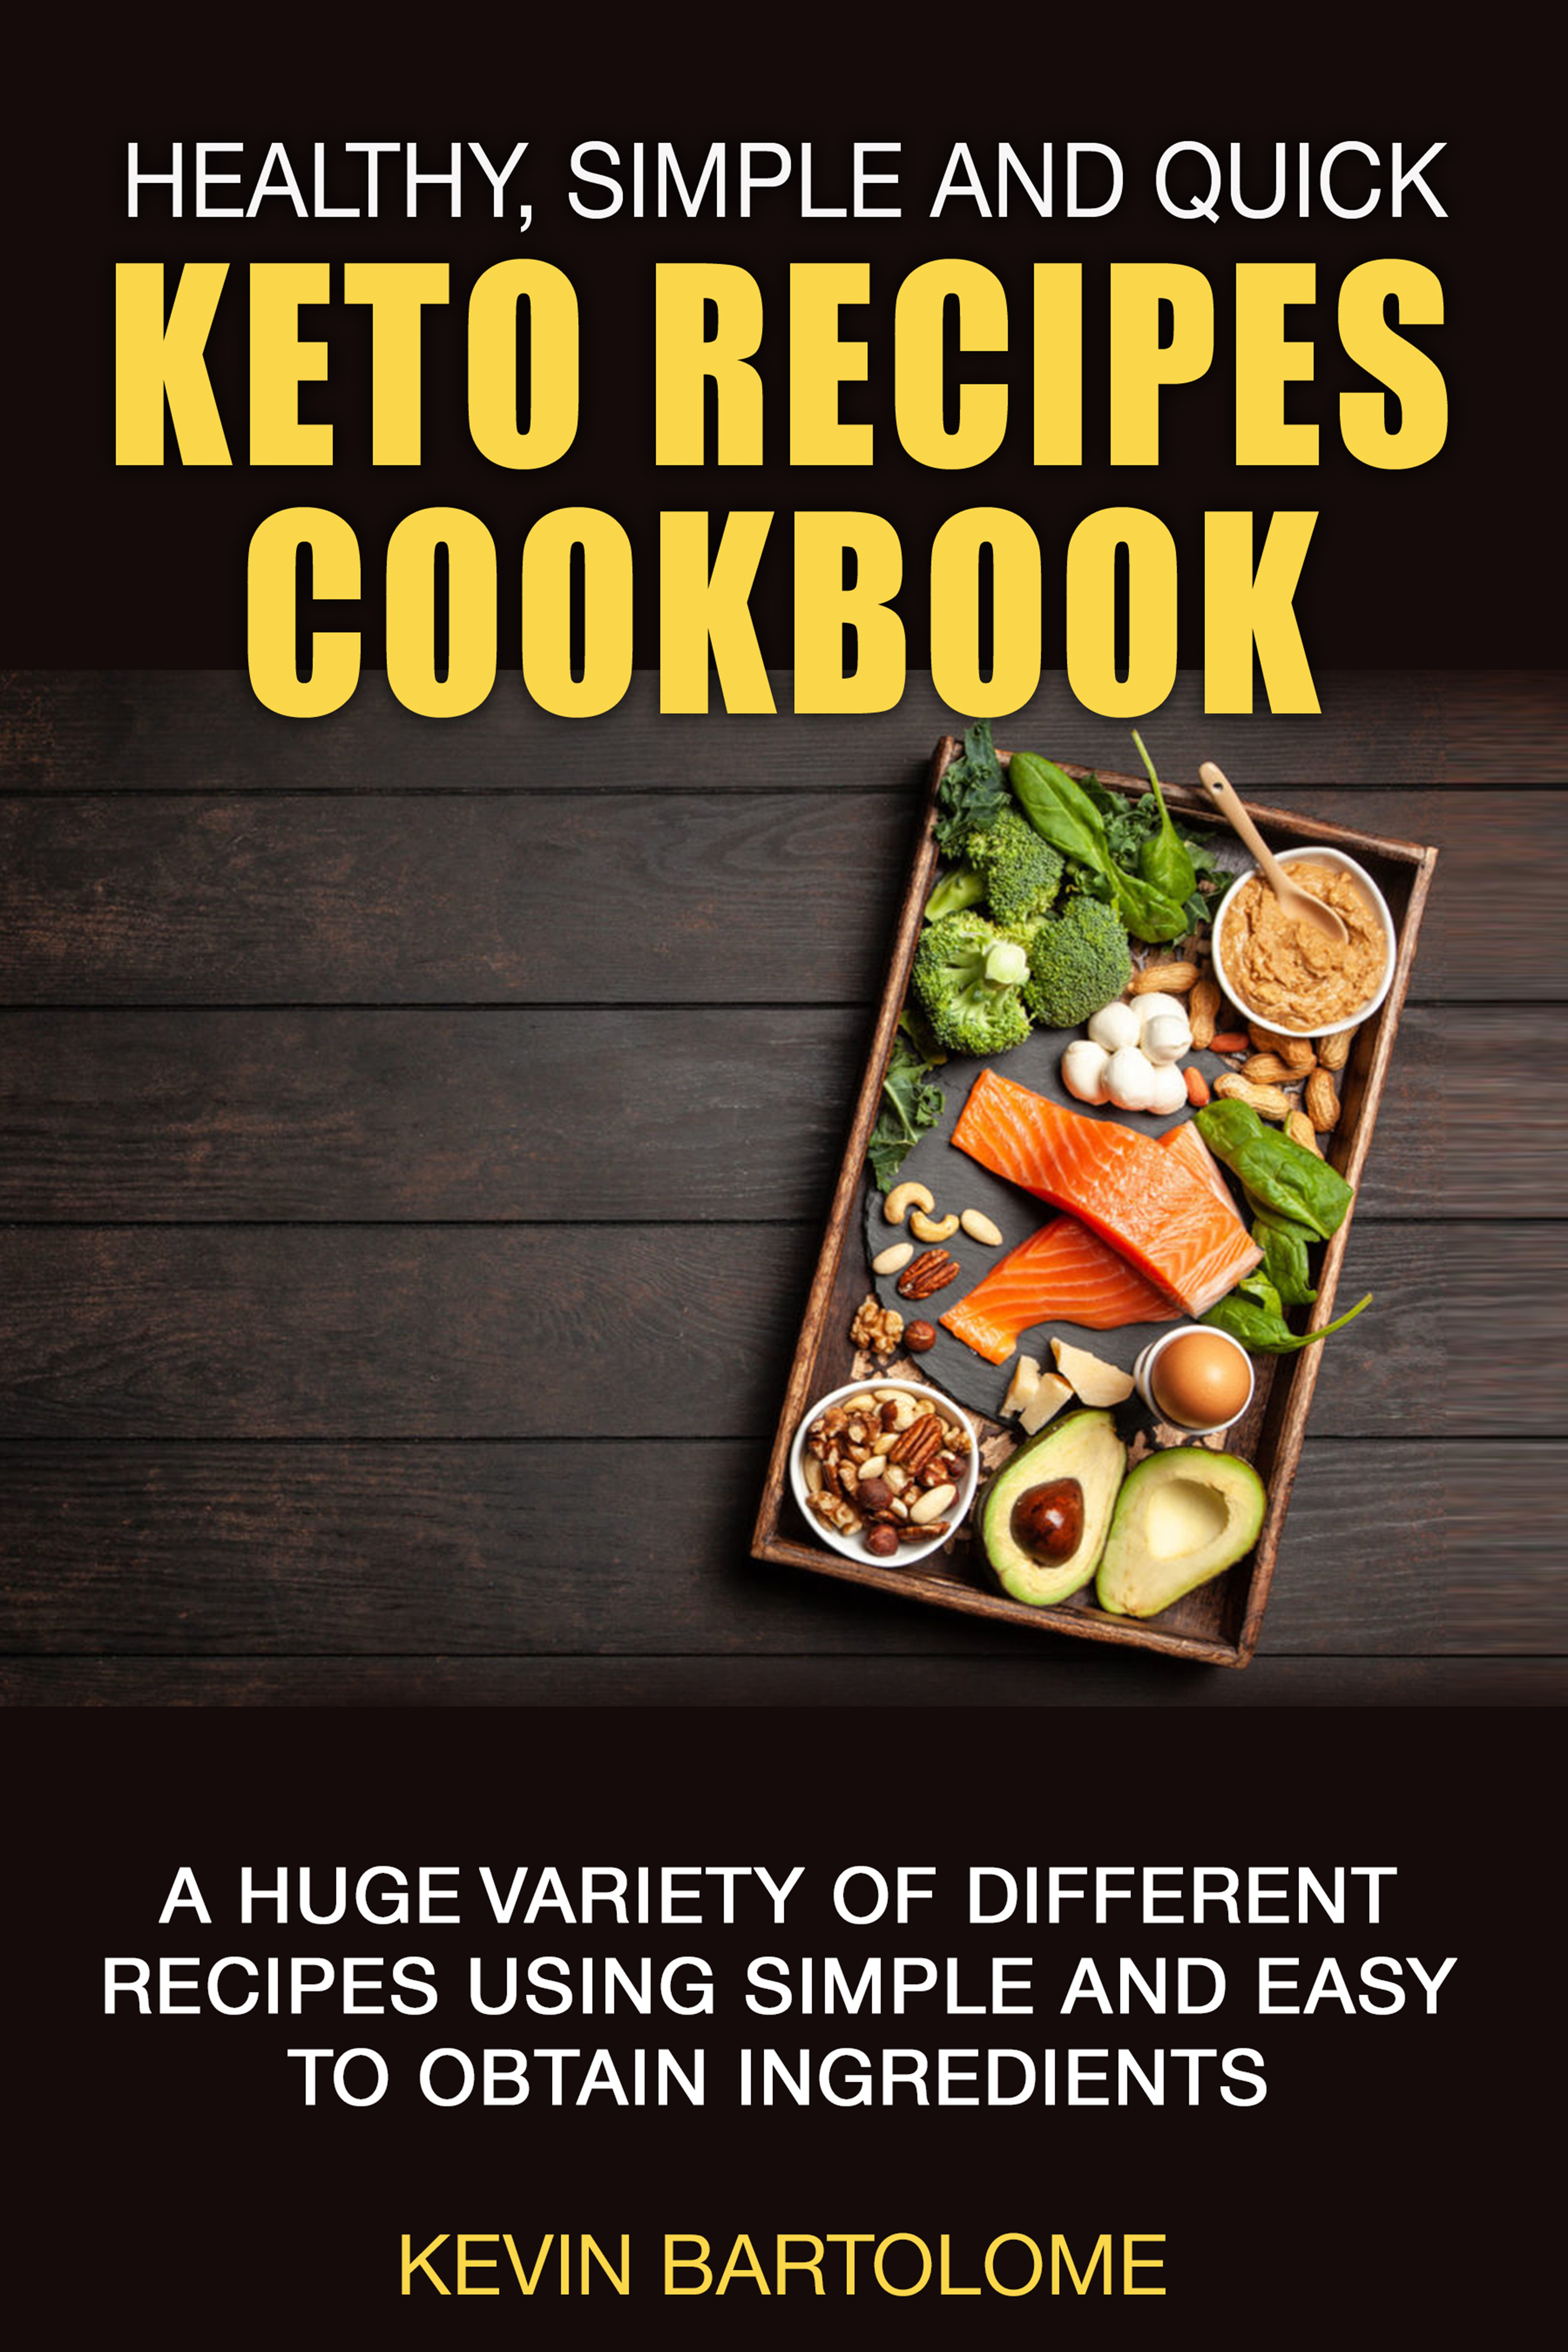 FREE: Healthy, Simple and Quick Keto Recipes Cookbook by Kevin Bartolome